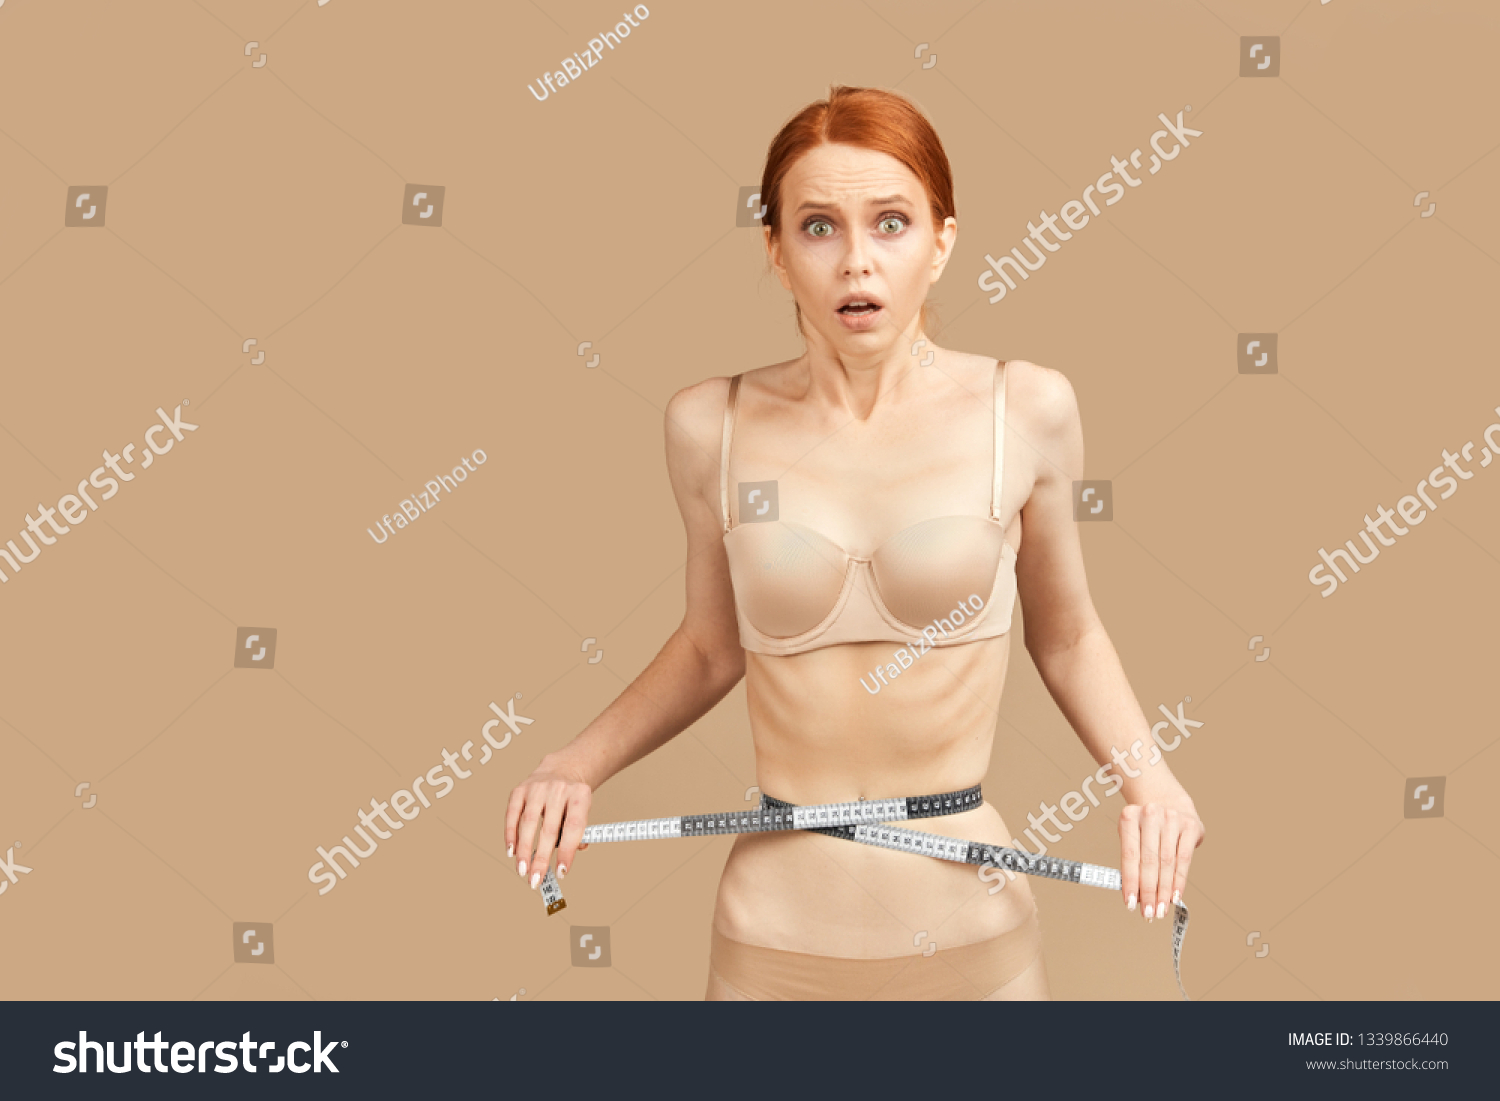 Anorexic Nude